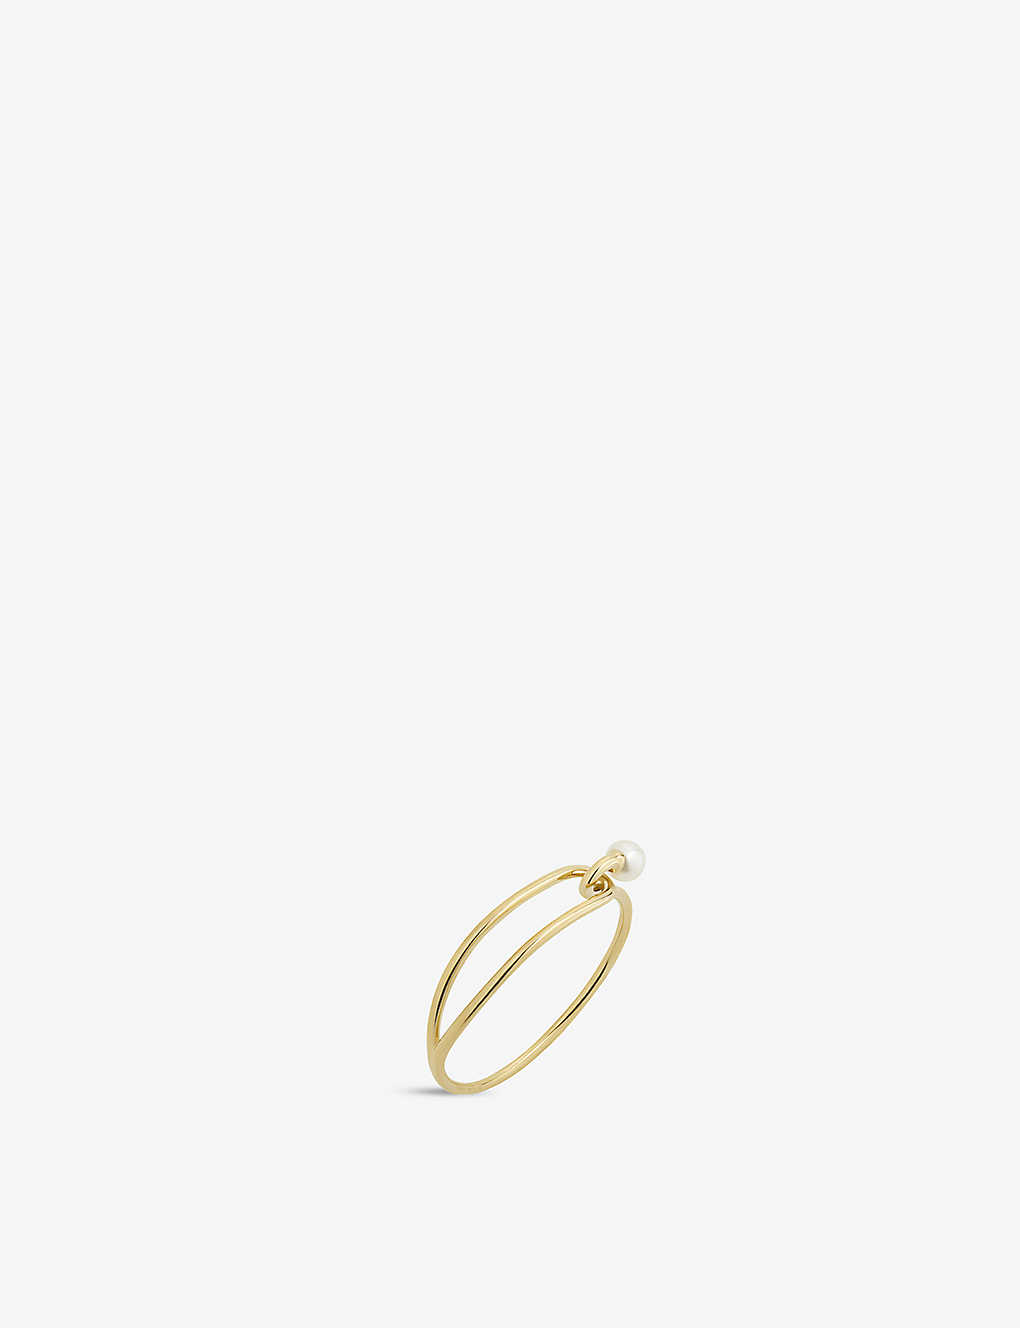 The Alkemistry Ruifier Astra Lunar 18ct Yellow-gold And Akoya Pearl Ring In 18ct Yellow Gold